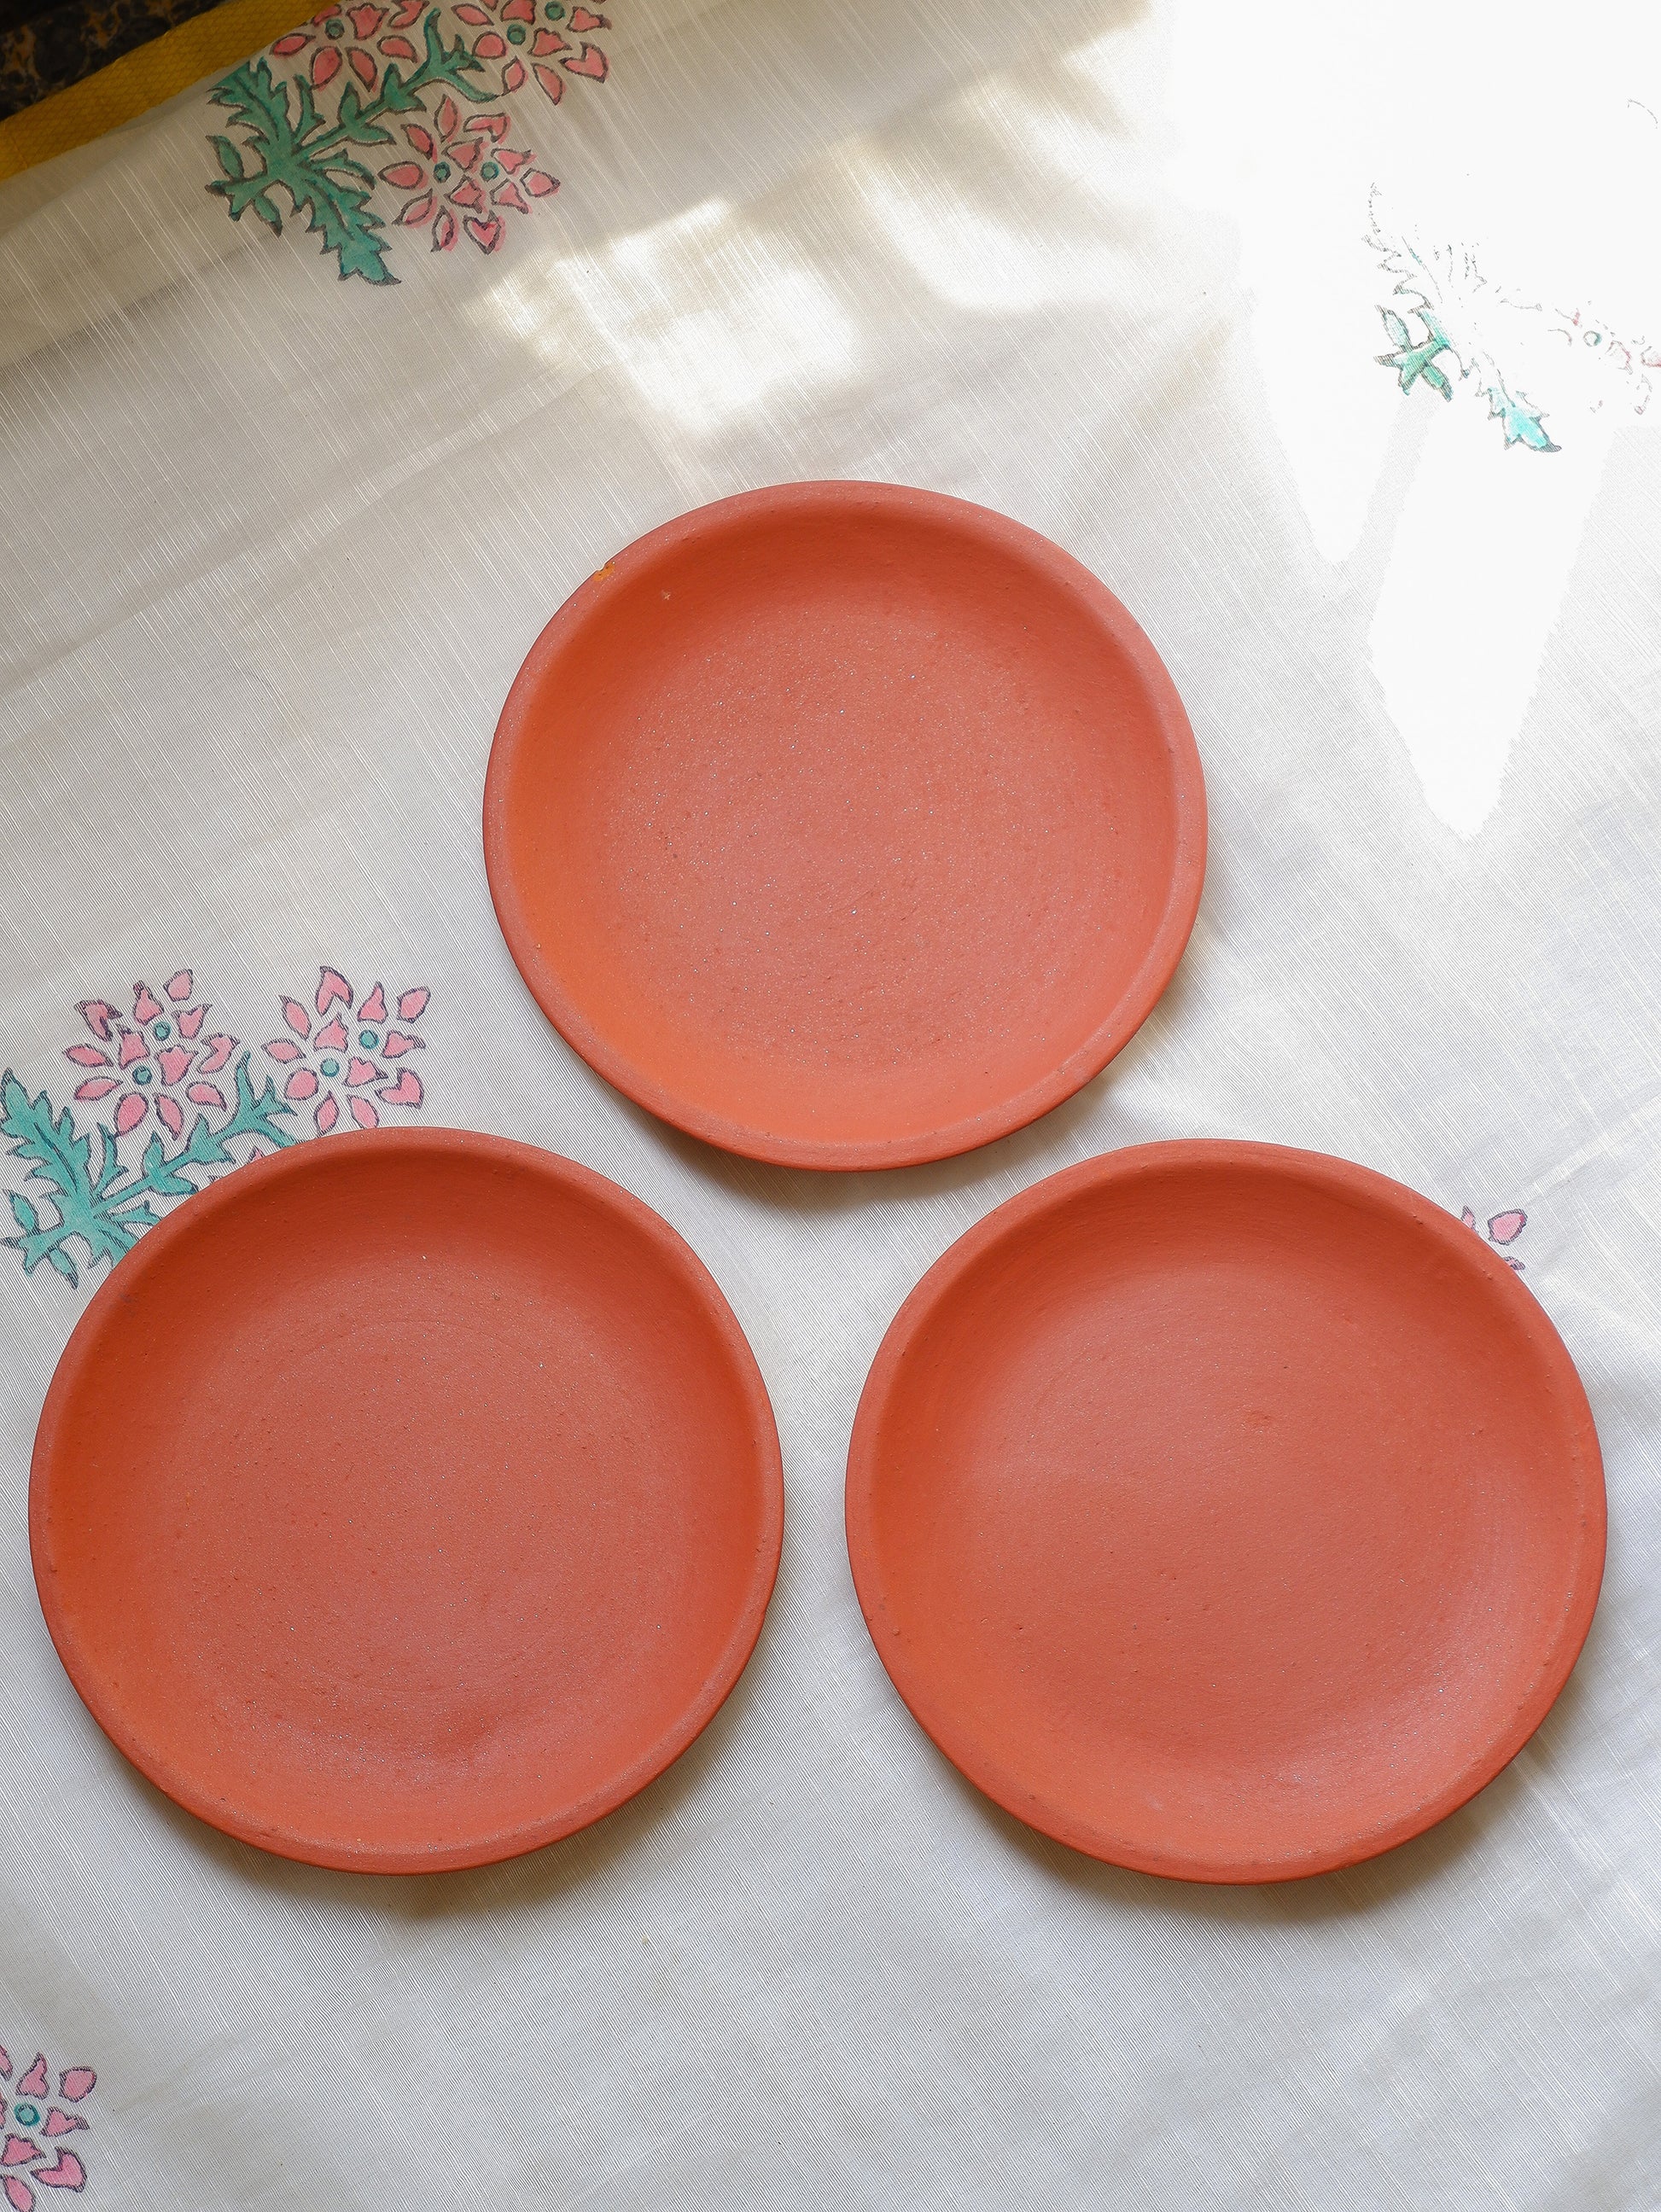 Shop Terracotta wall plates for painting to add to your home décor. Delivered all India